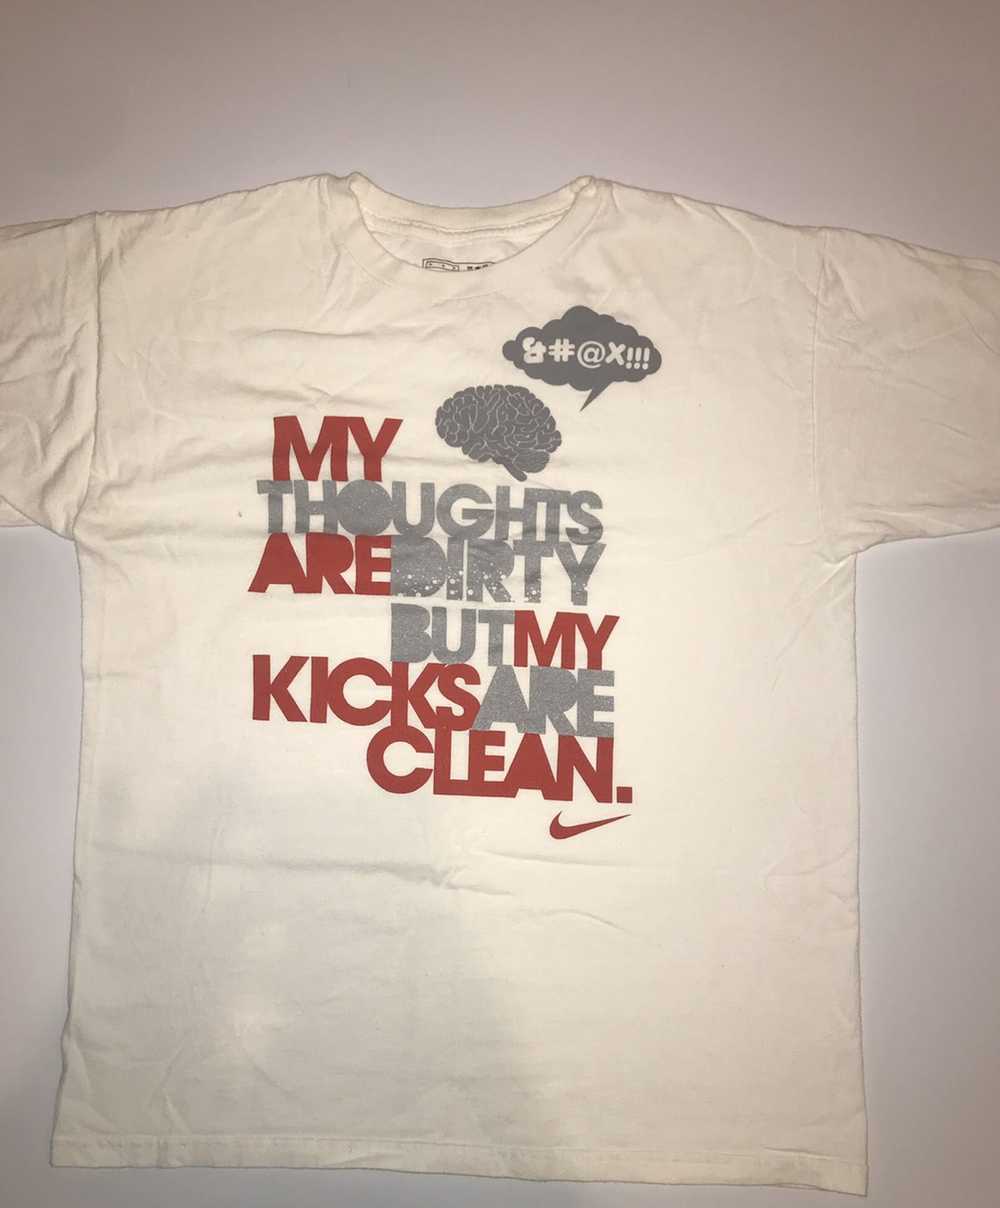 Nike My Thoughts Are Dirty But My Kicks Are Clean… - image 1